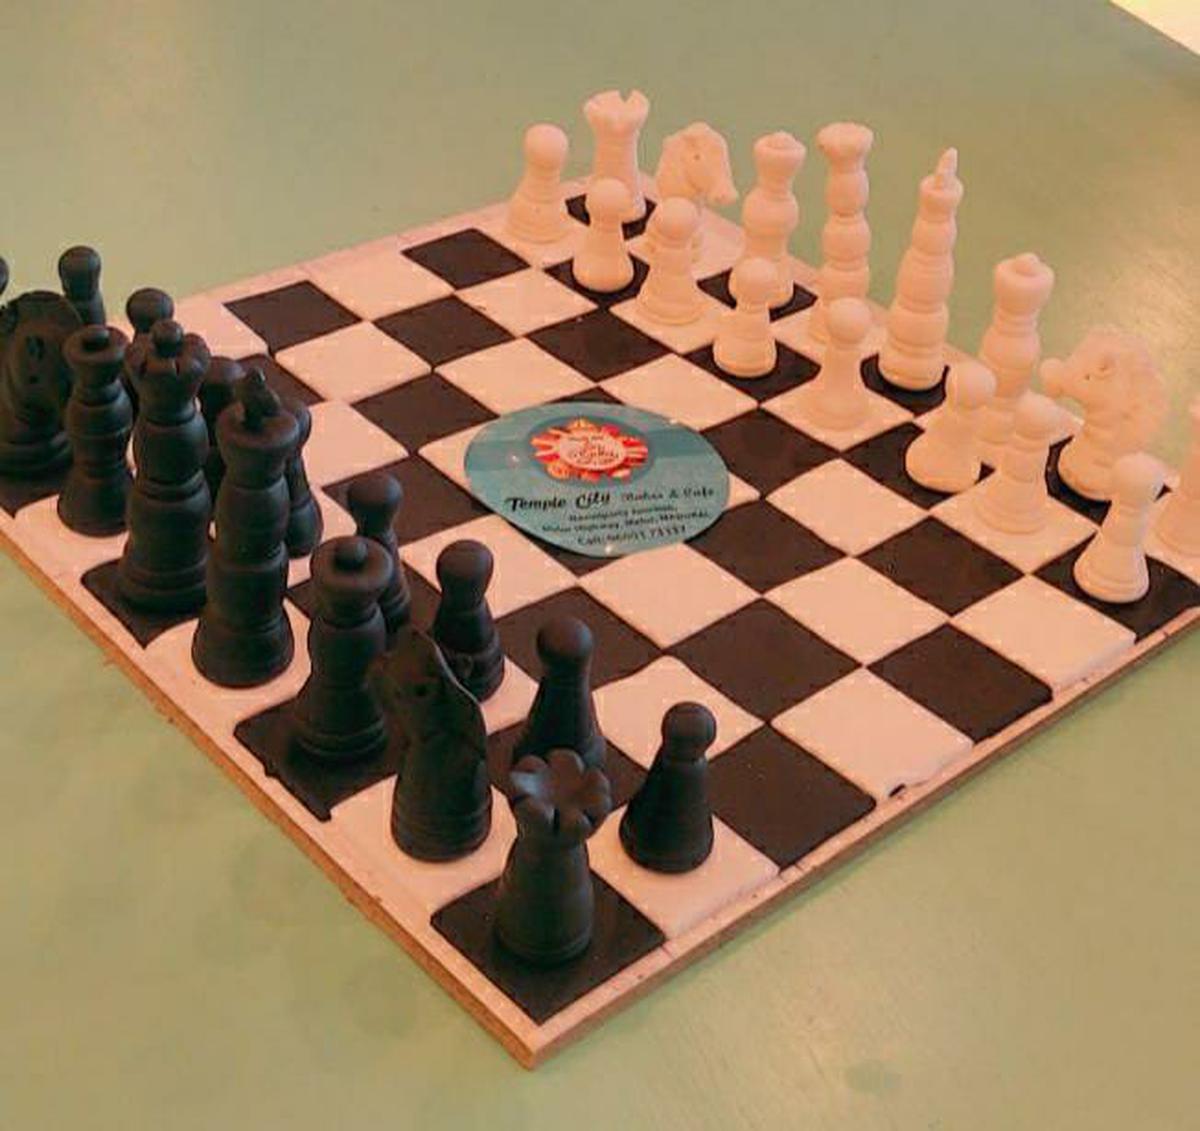 Temple City group of hotels in Madurai has introduced a chess board cake to mark the ongoing Chess Olympiad in Mamallapuram